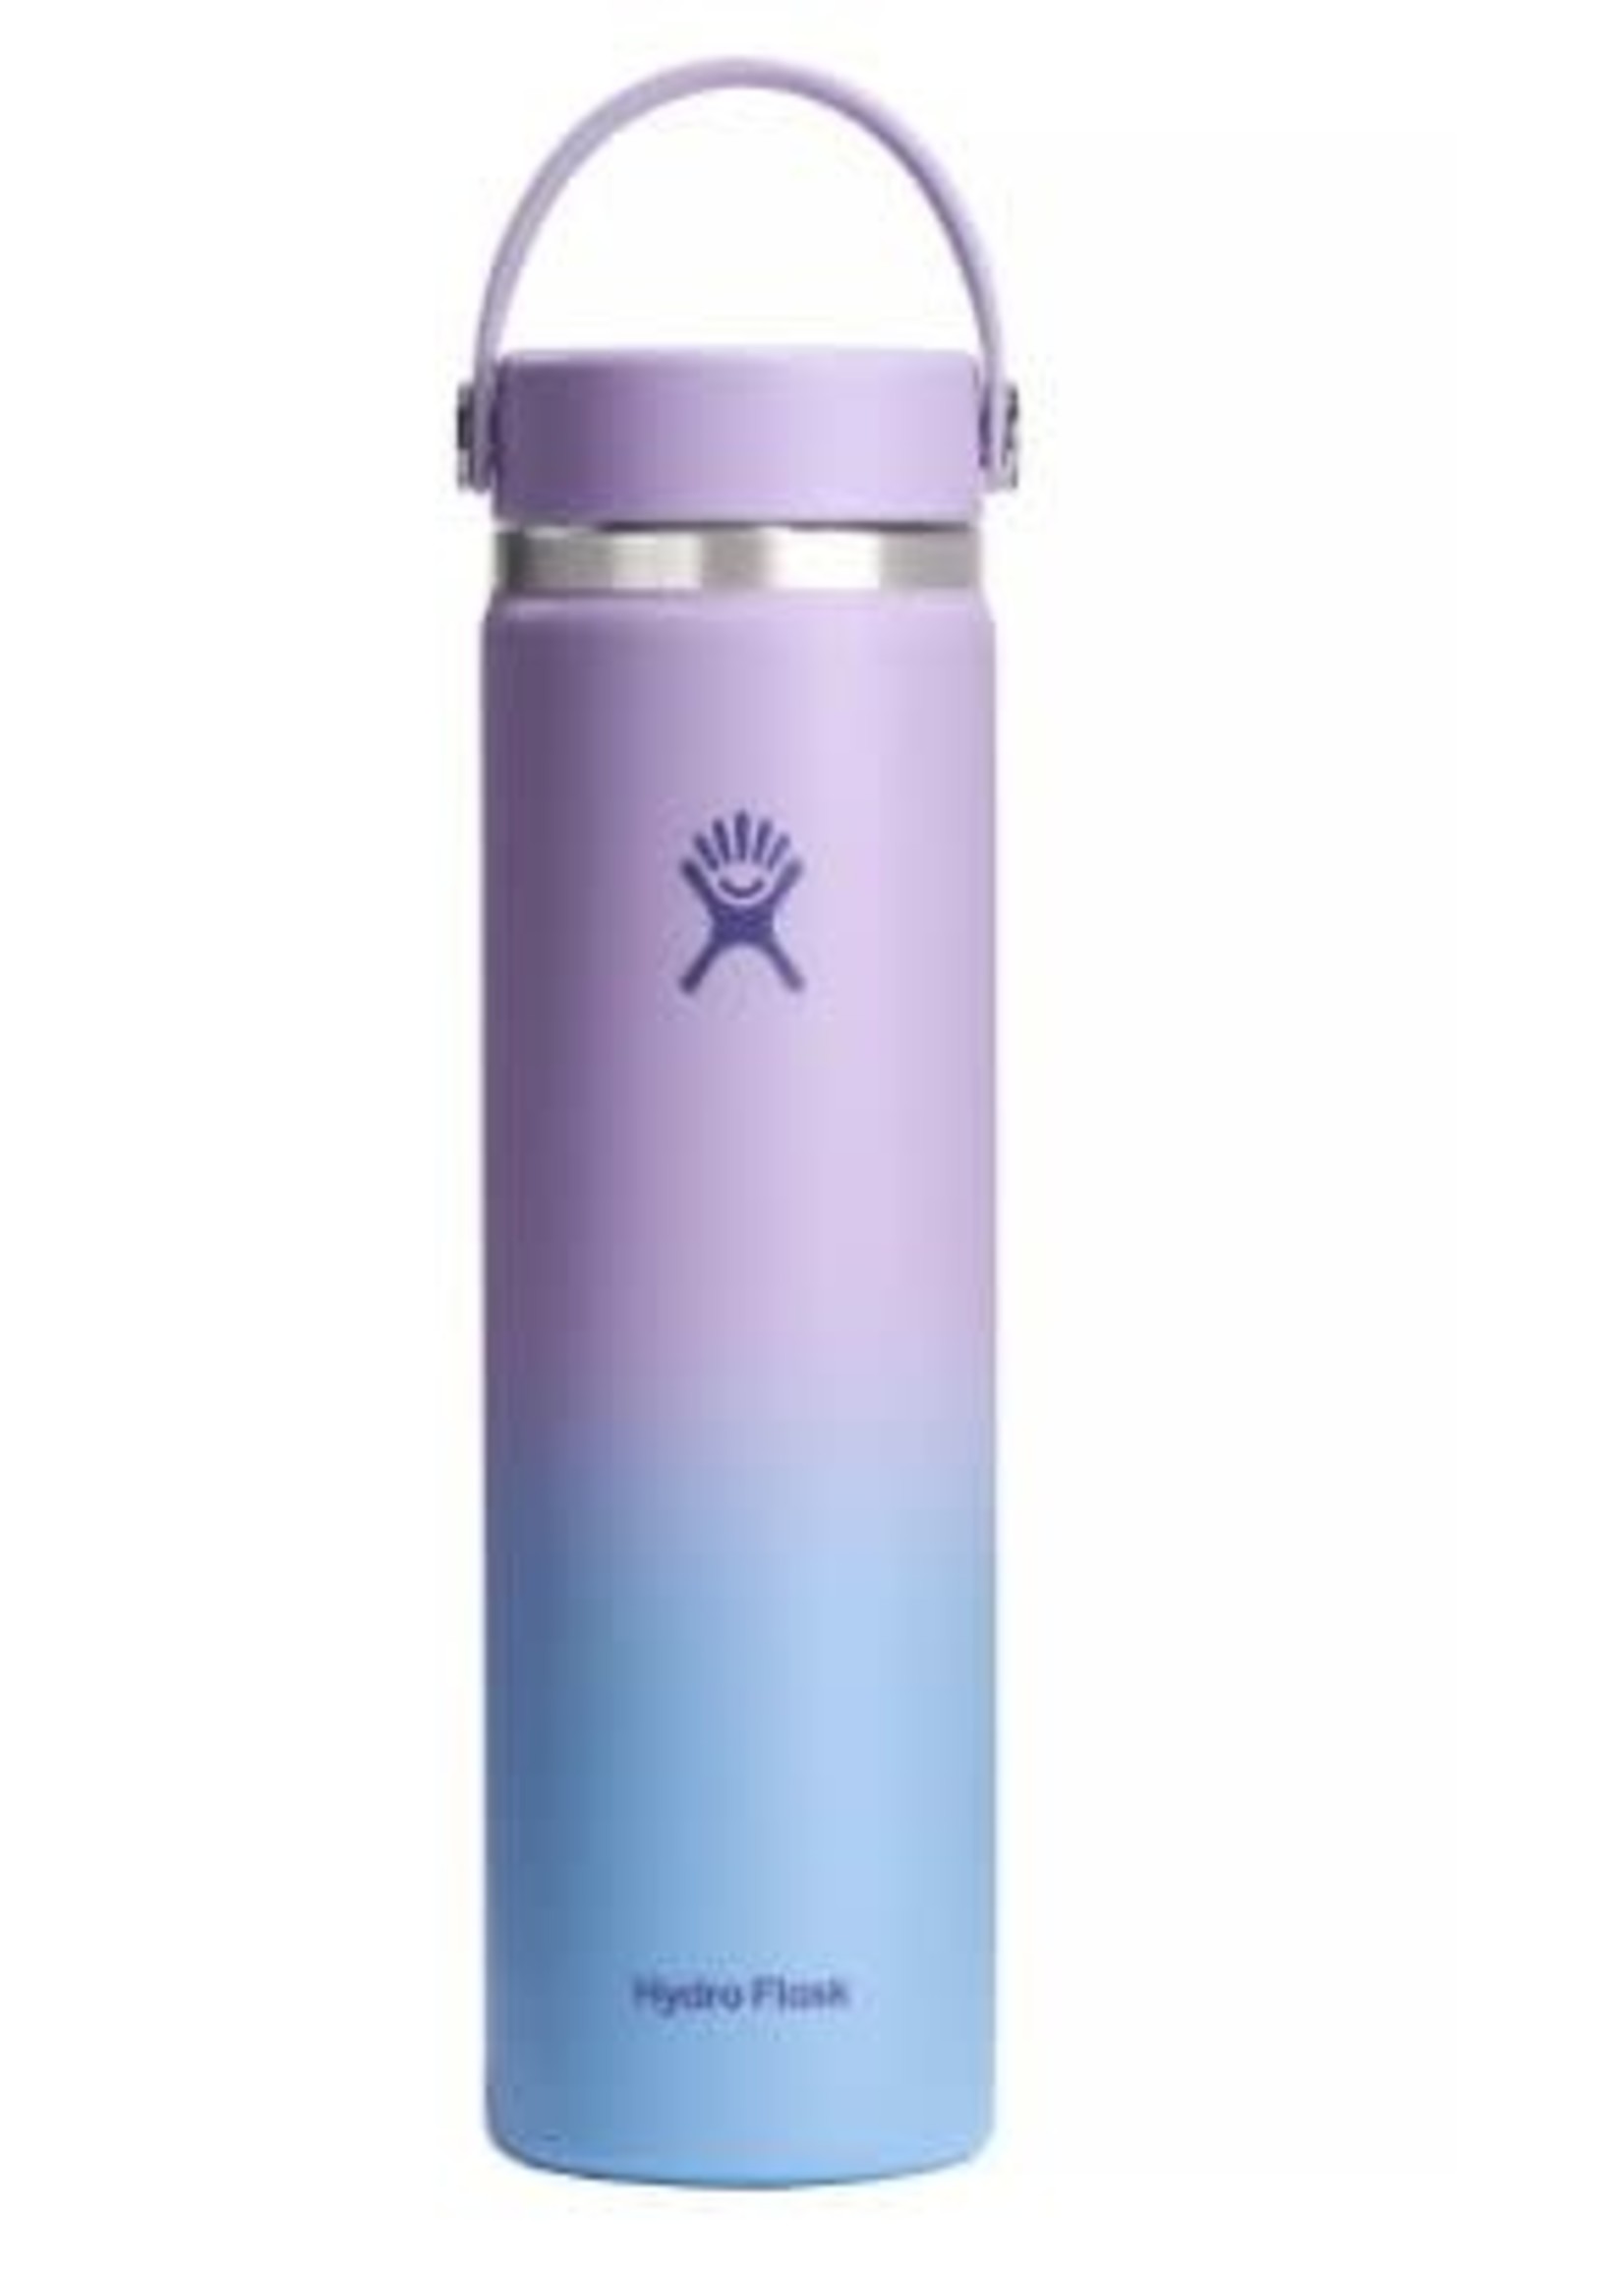 Hydro Flask Polar Ombré Collection Wide Mouth 24 oz. Bottle, Moonlight